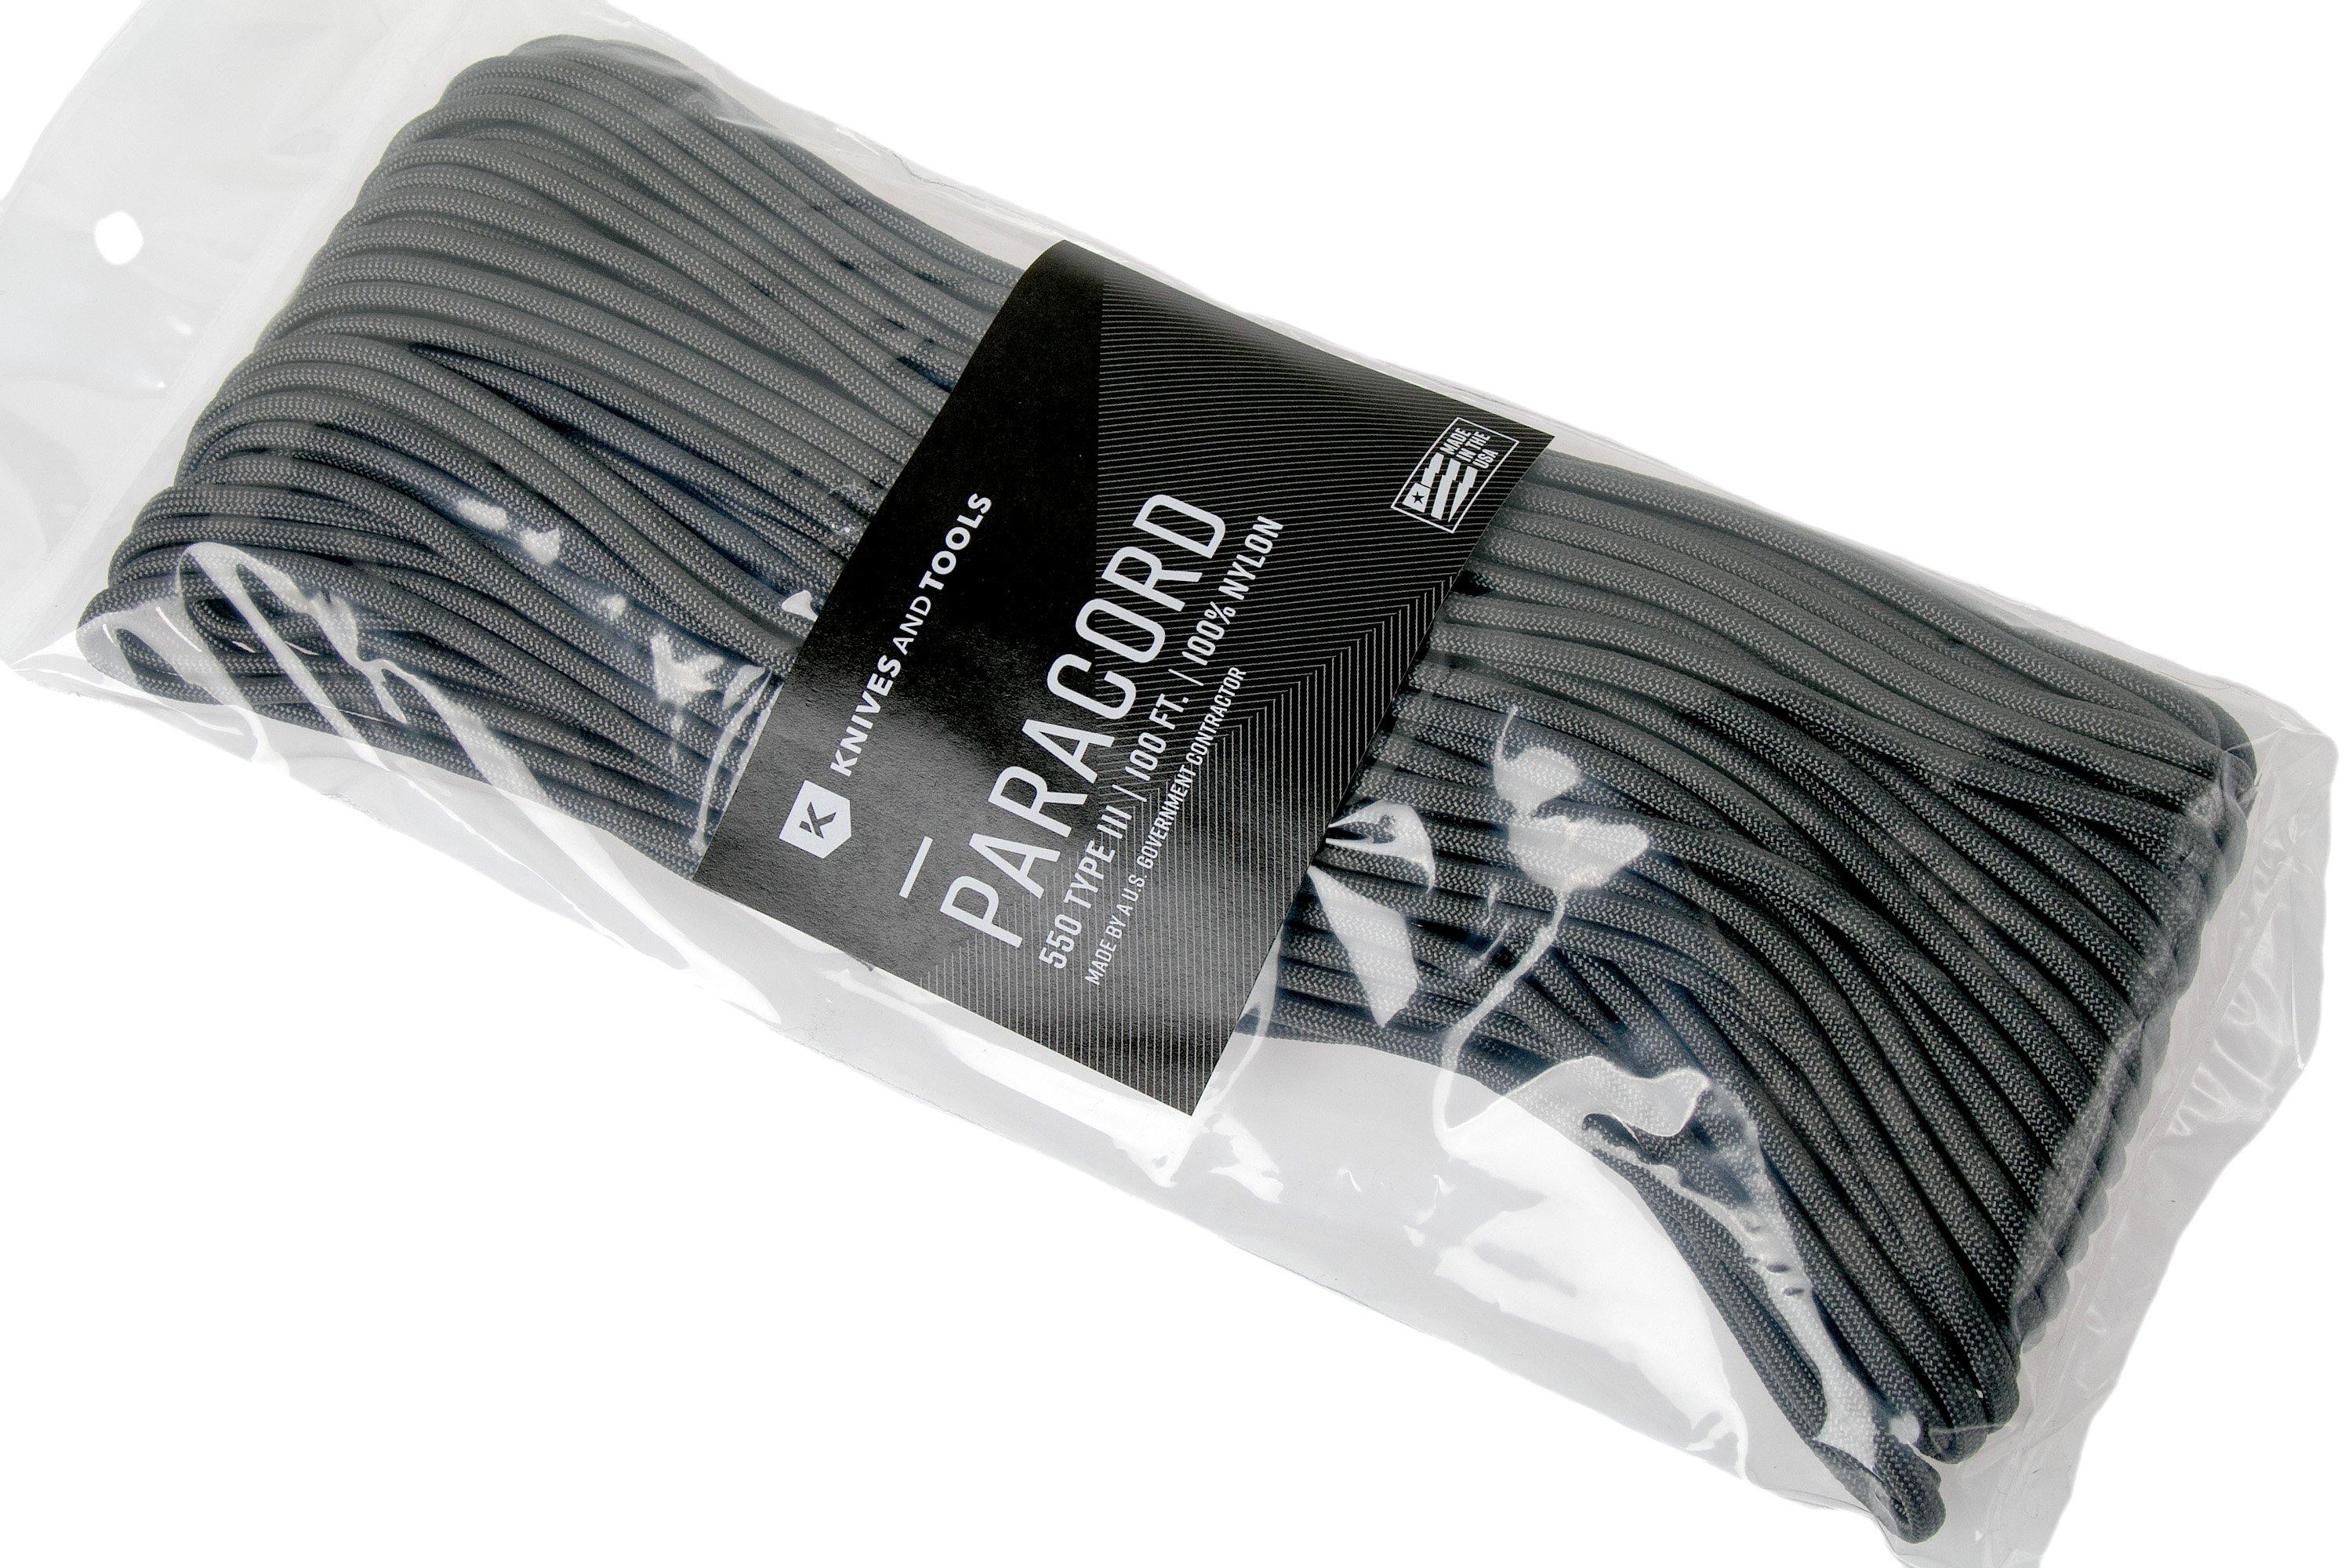 Knivesandtools 550 paracord type III, colour: charcoal grey, 100 ft (30.48  m)